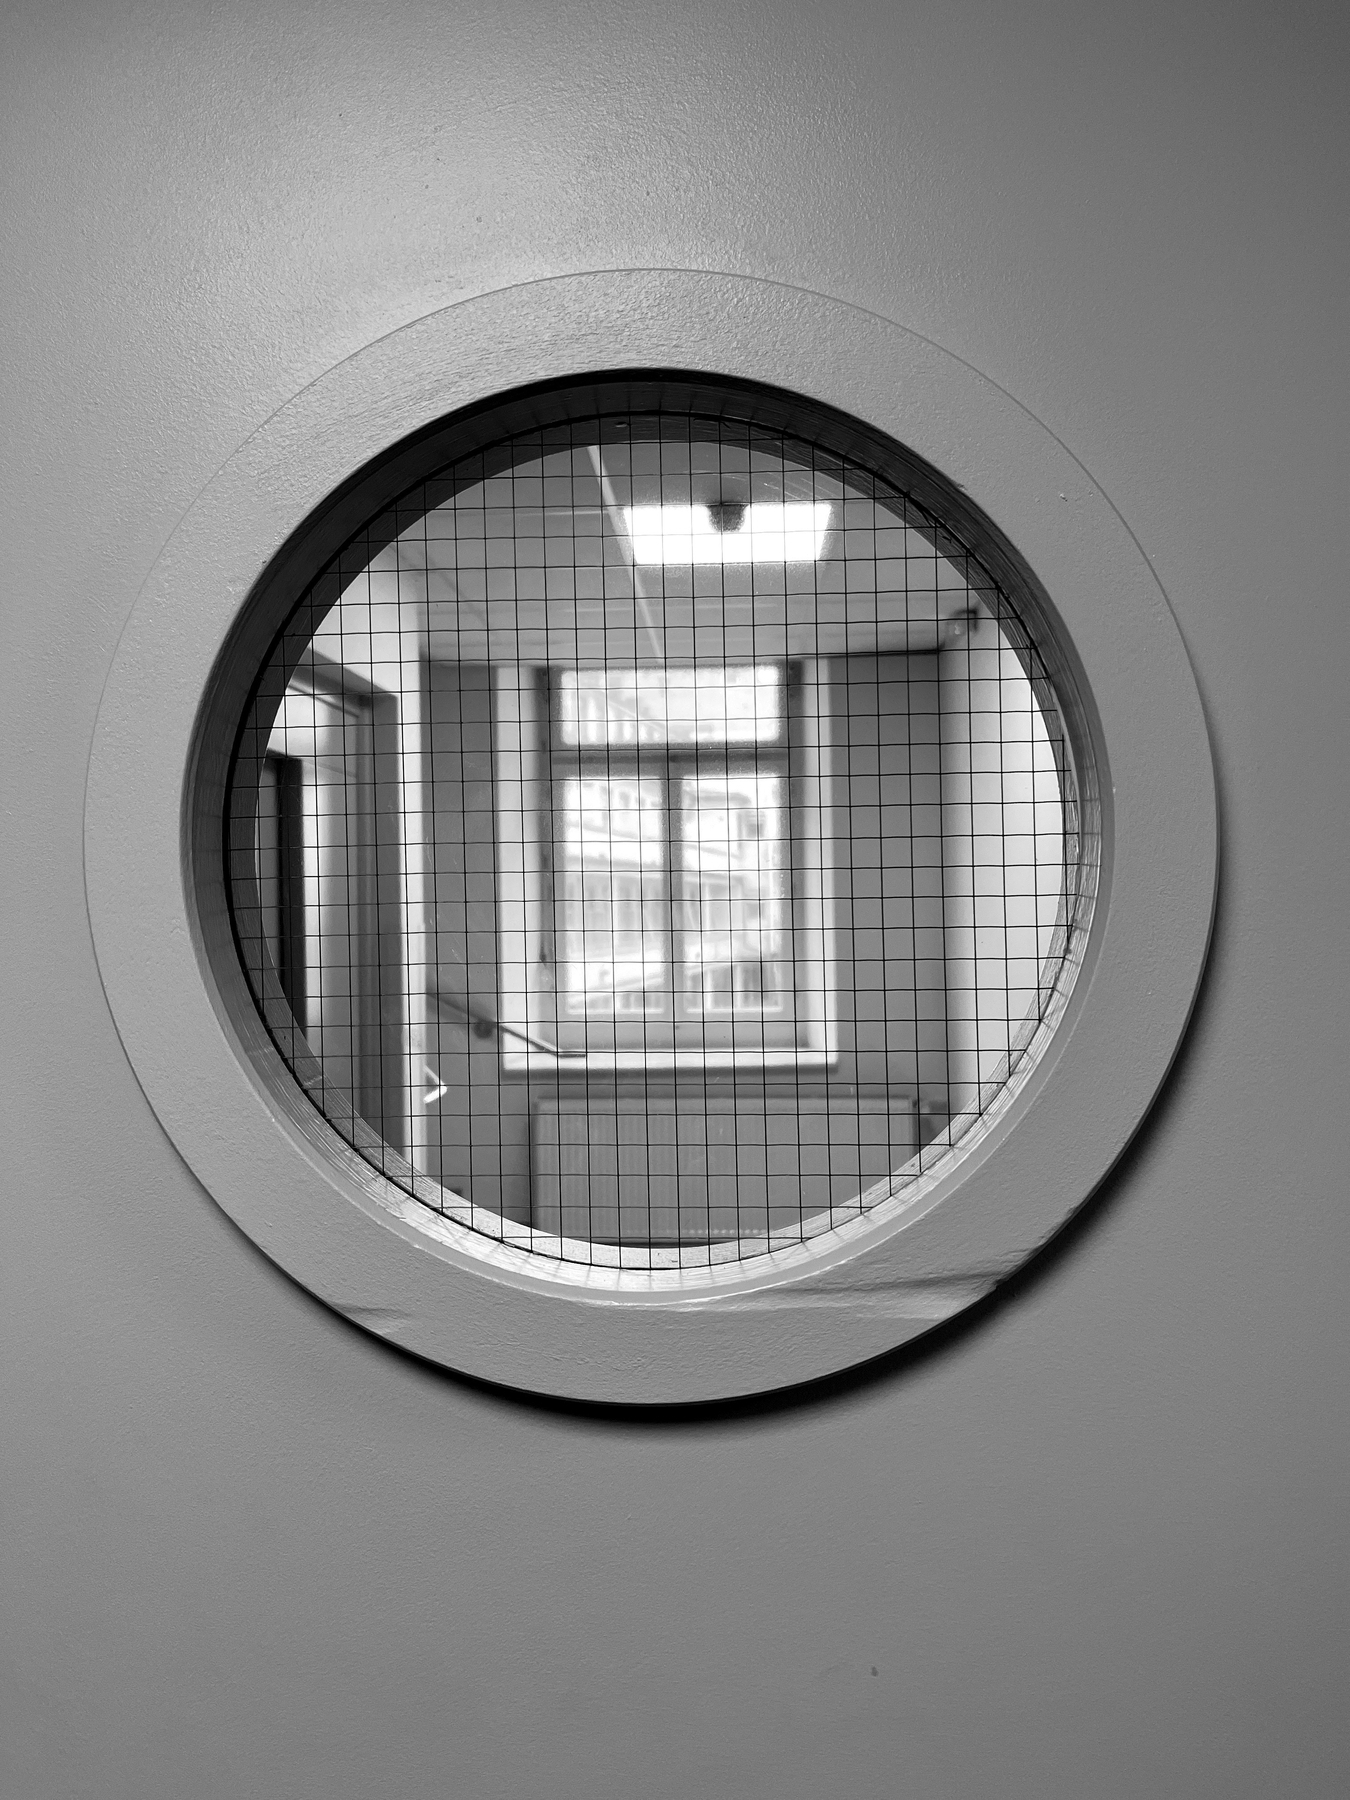 A black and white photo of a round window with a wire mesh, looking into another room with a window reflecting light.